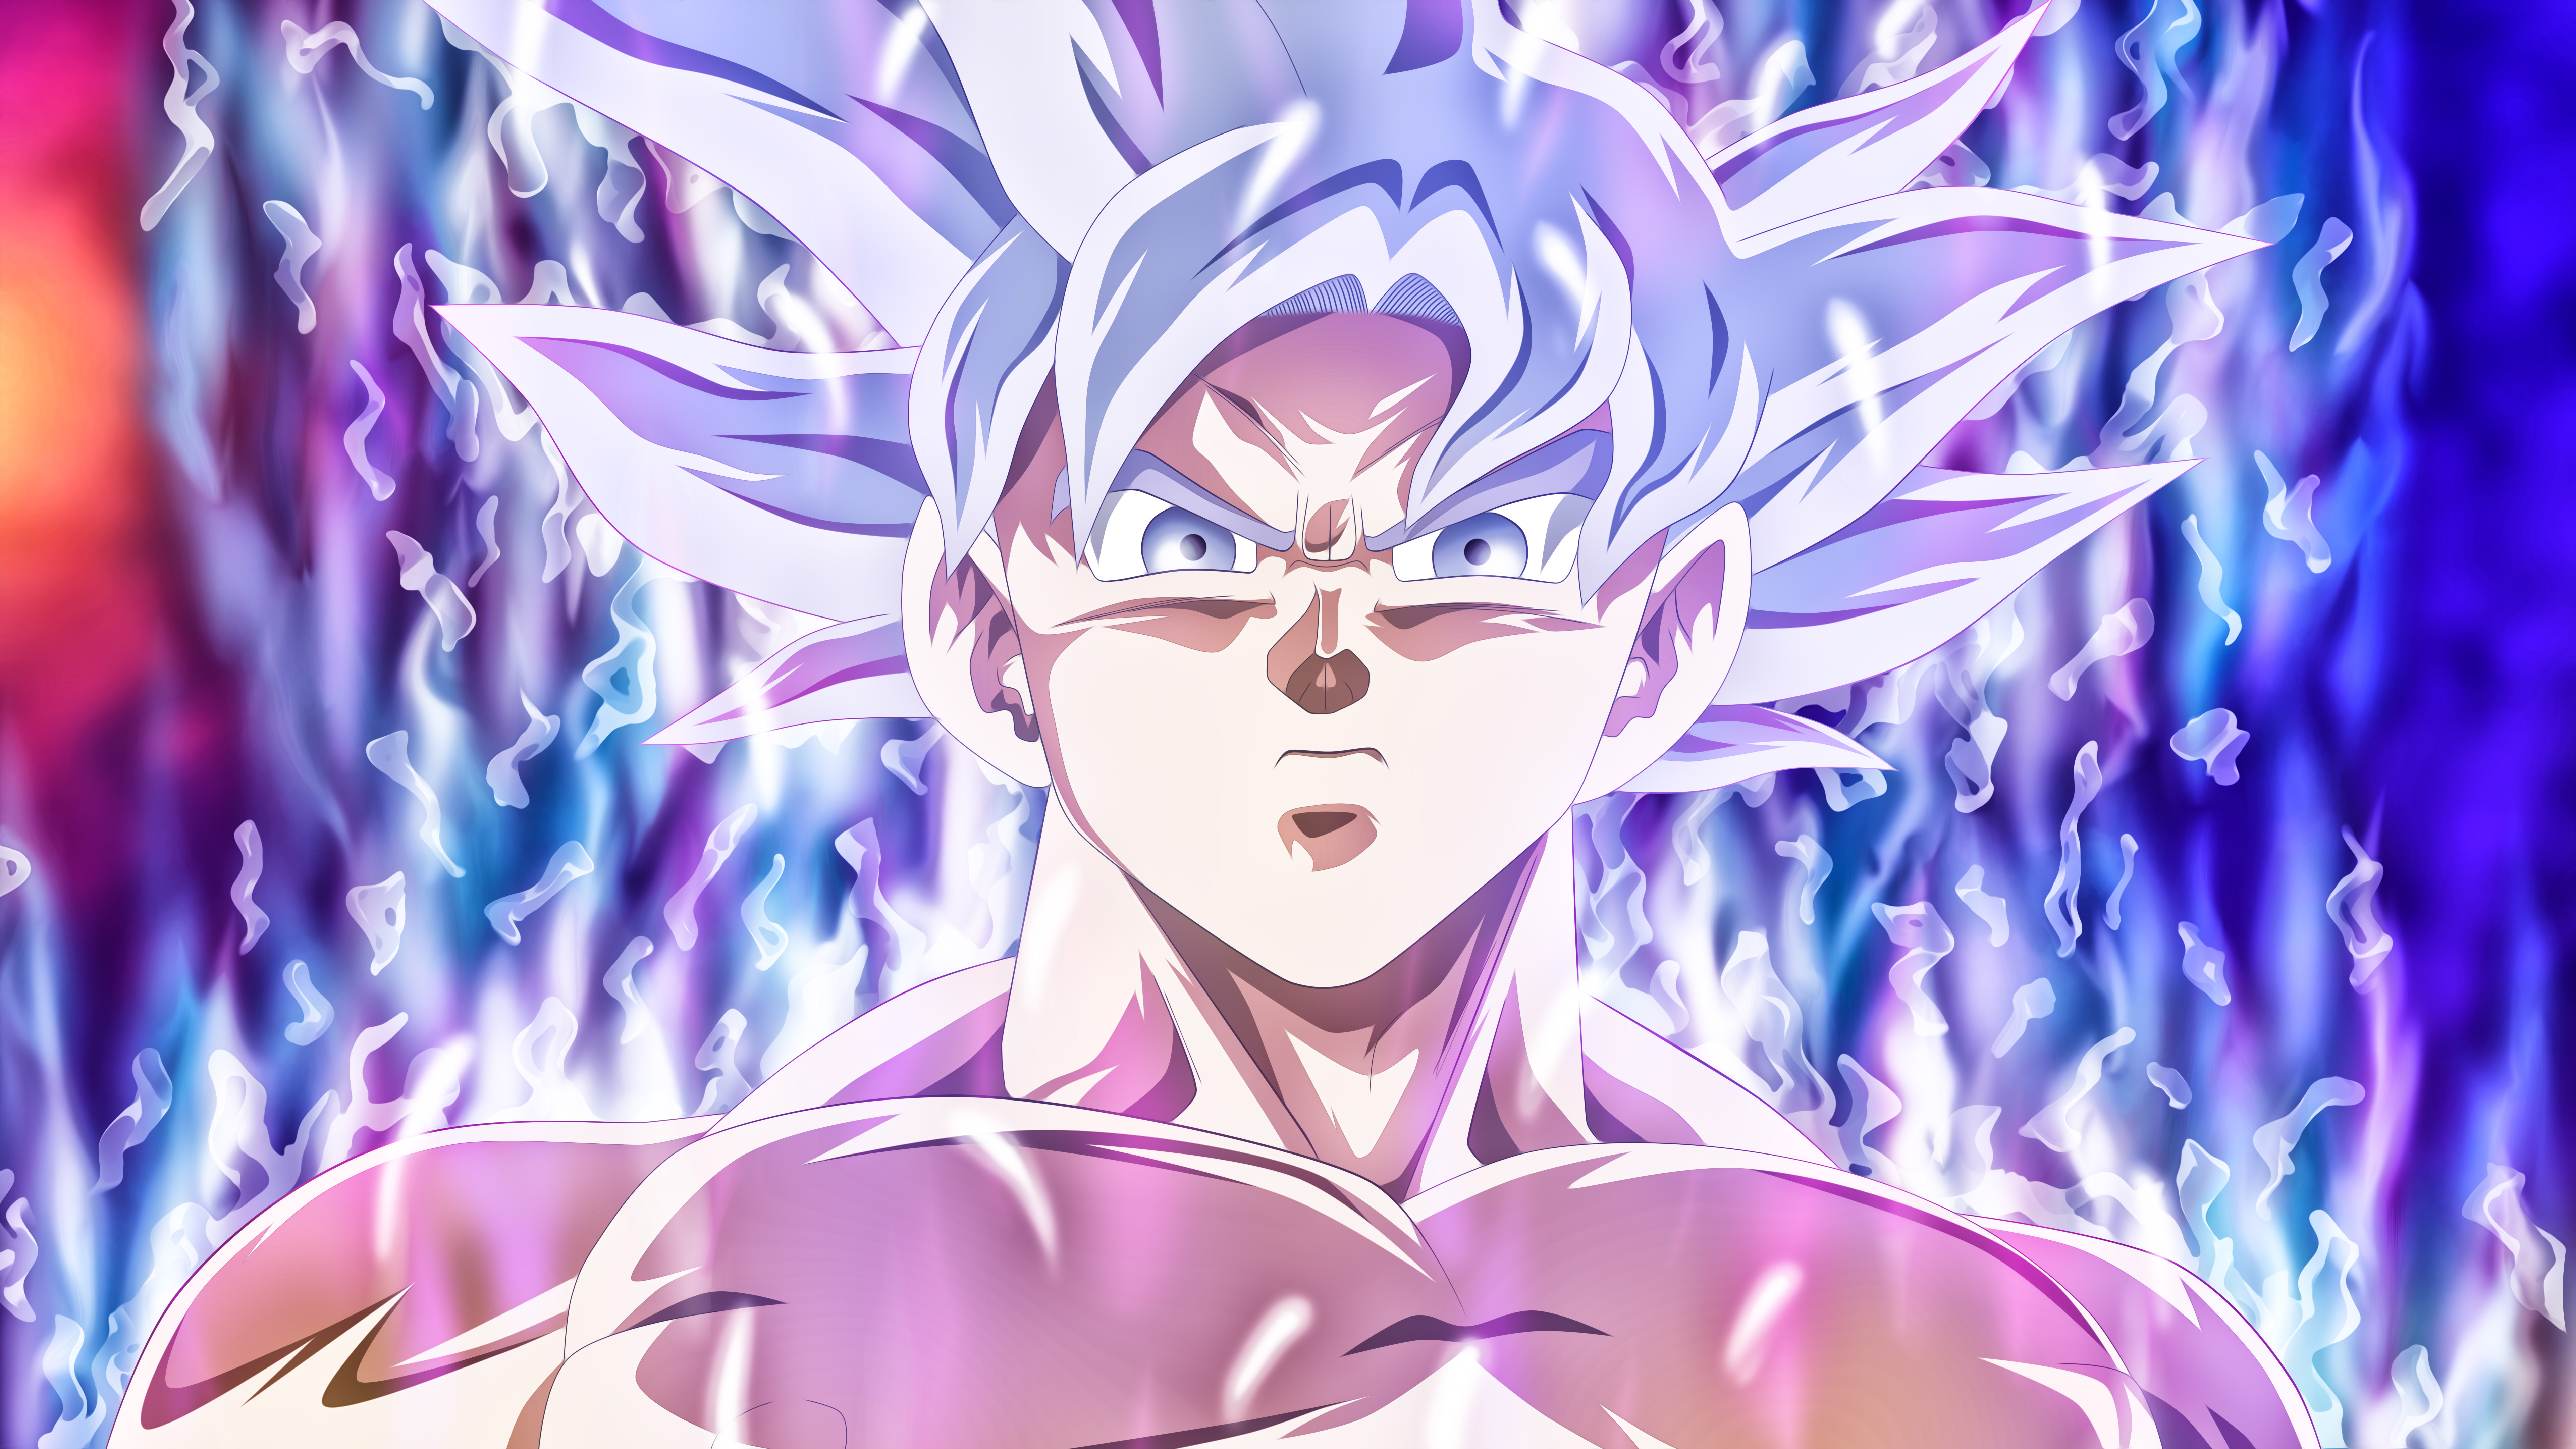 Goku Mastered Ultra Instinct HD Anime 4k Wallpapers Images Backgrounds Photos and Pictures